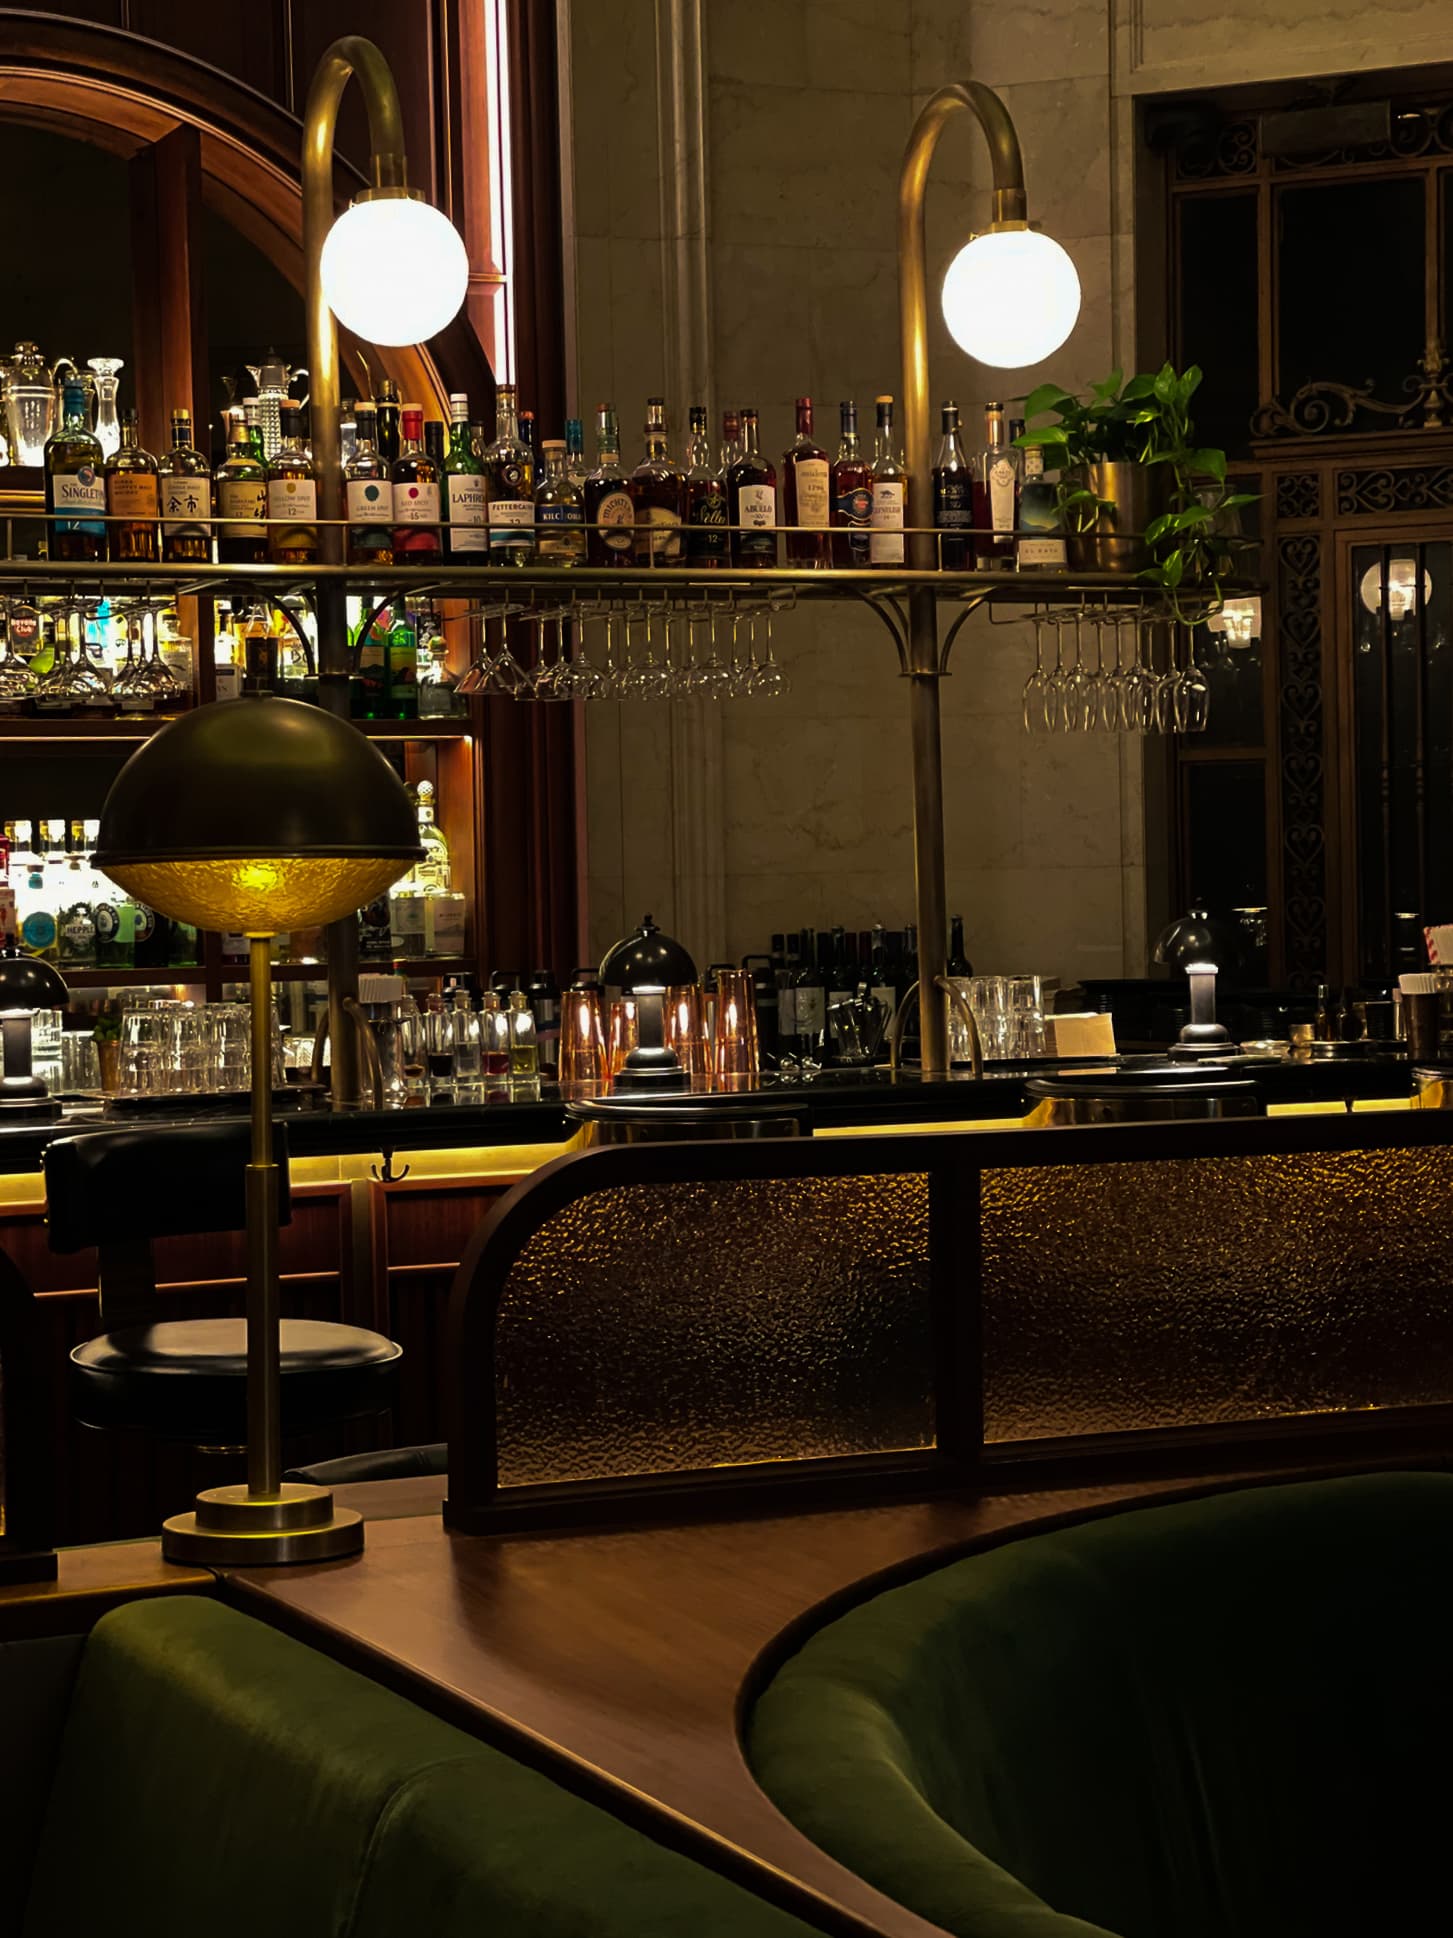 this is an image of Hawksmoor Liverpool's bar and shows the beautiful interiors and lighting used in the space